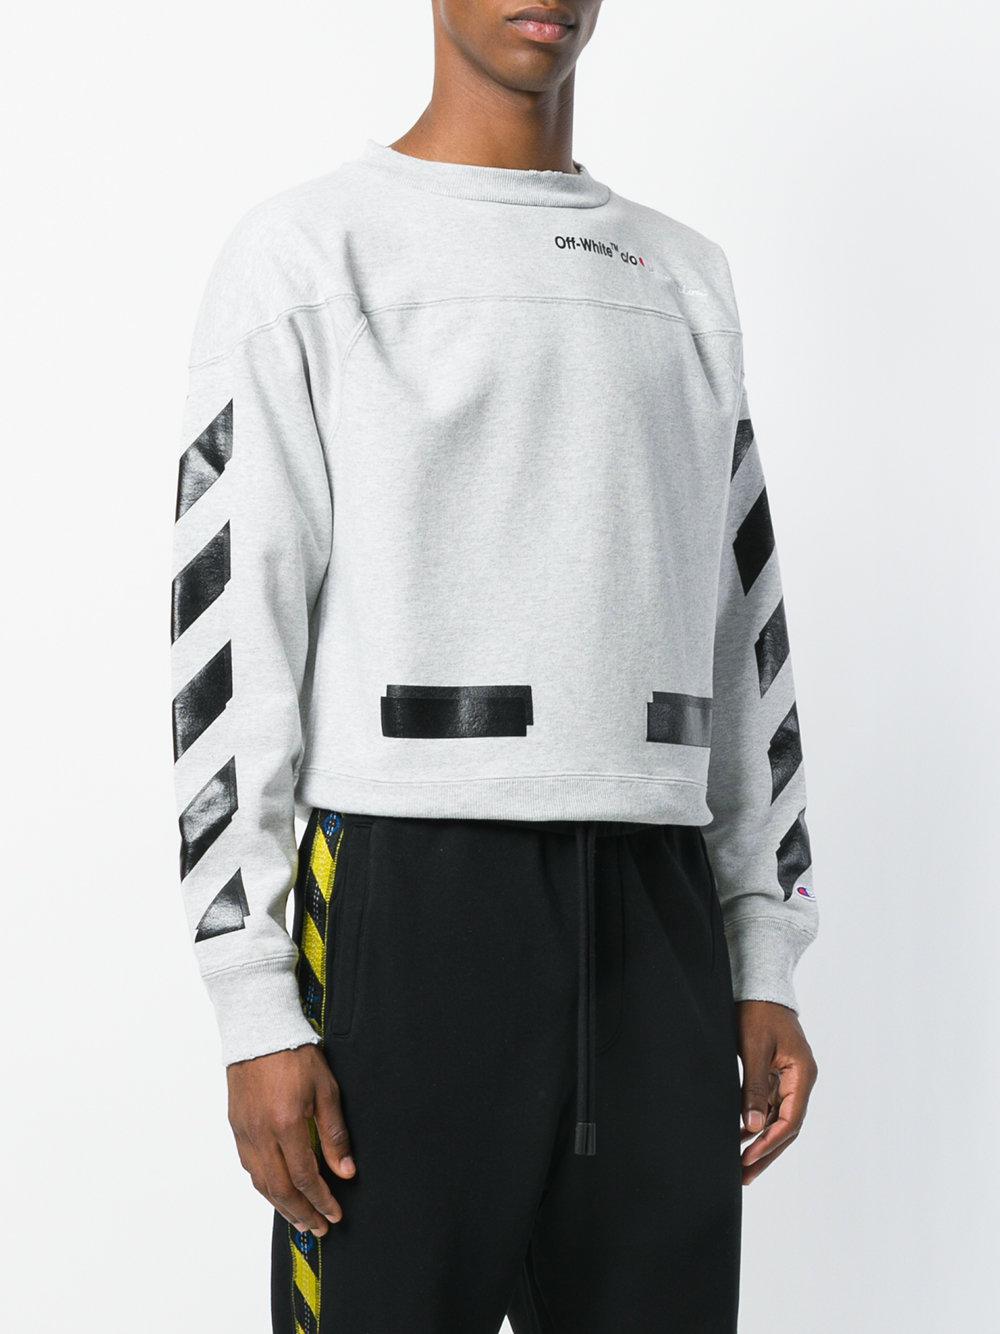 Off-White Virgil Abloh Cotton X Champion Neck Sweatshirt in Grey (Gray) for - Lyst